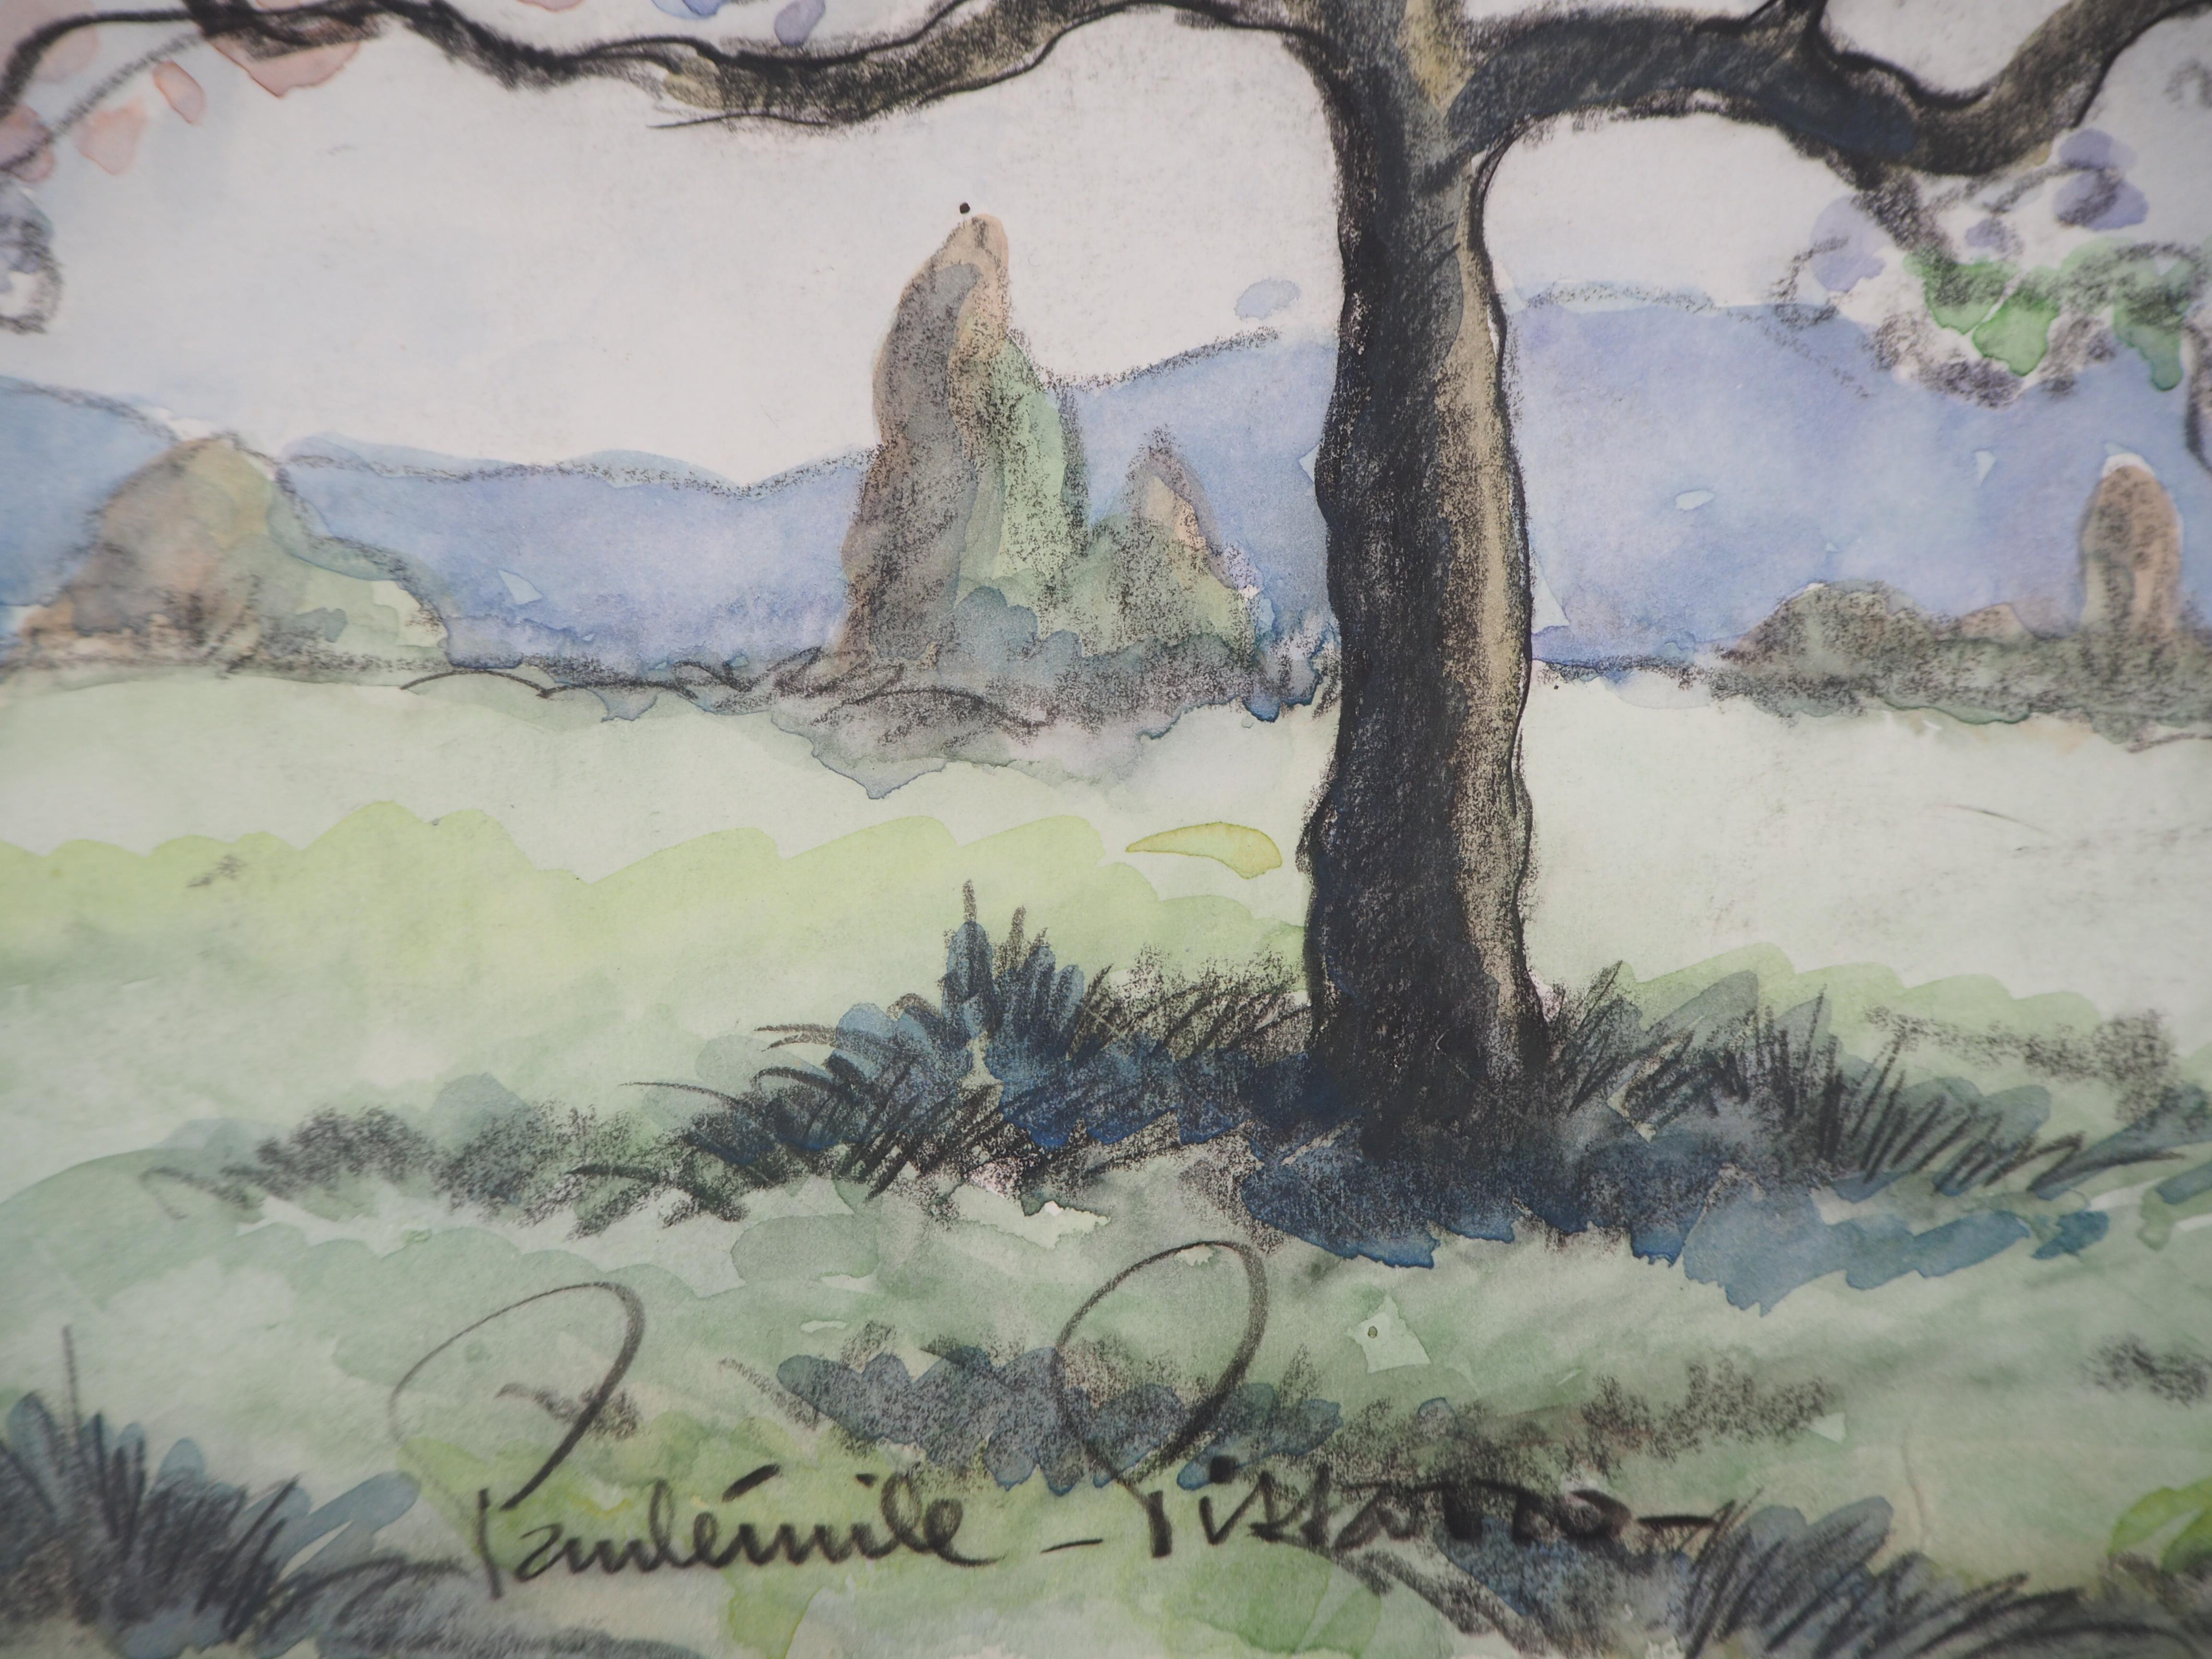 Normandy : Tall Apple Tree in Blossom - Original watercolor painting - Signed - Art by Paul Emile Pissarro